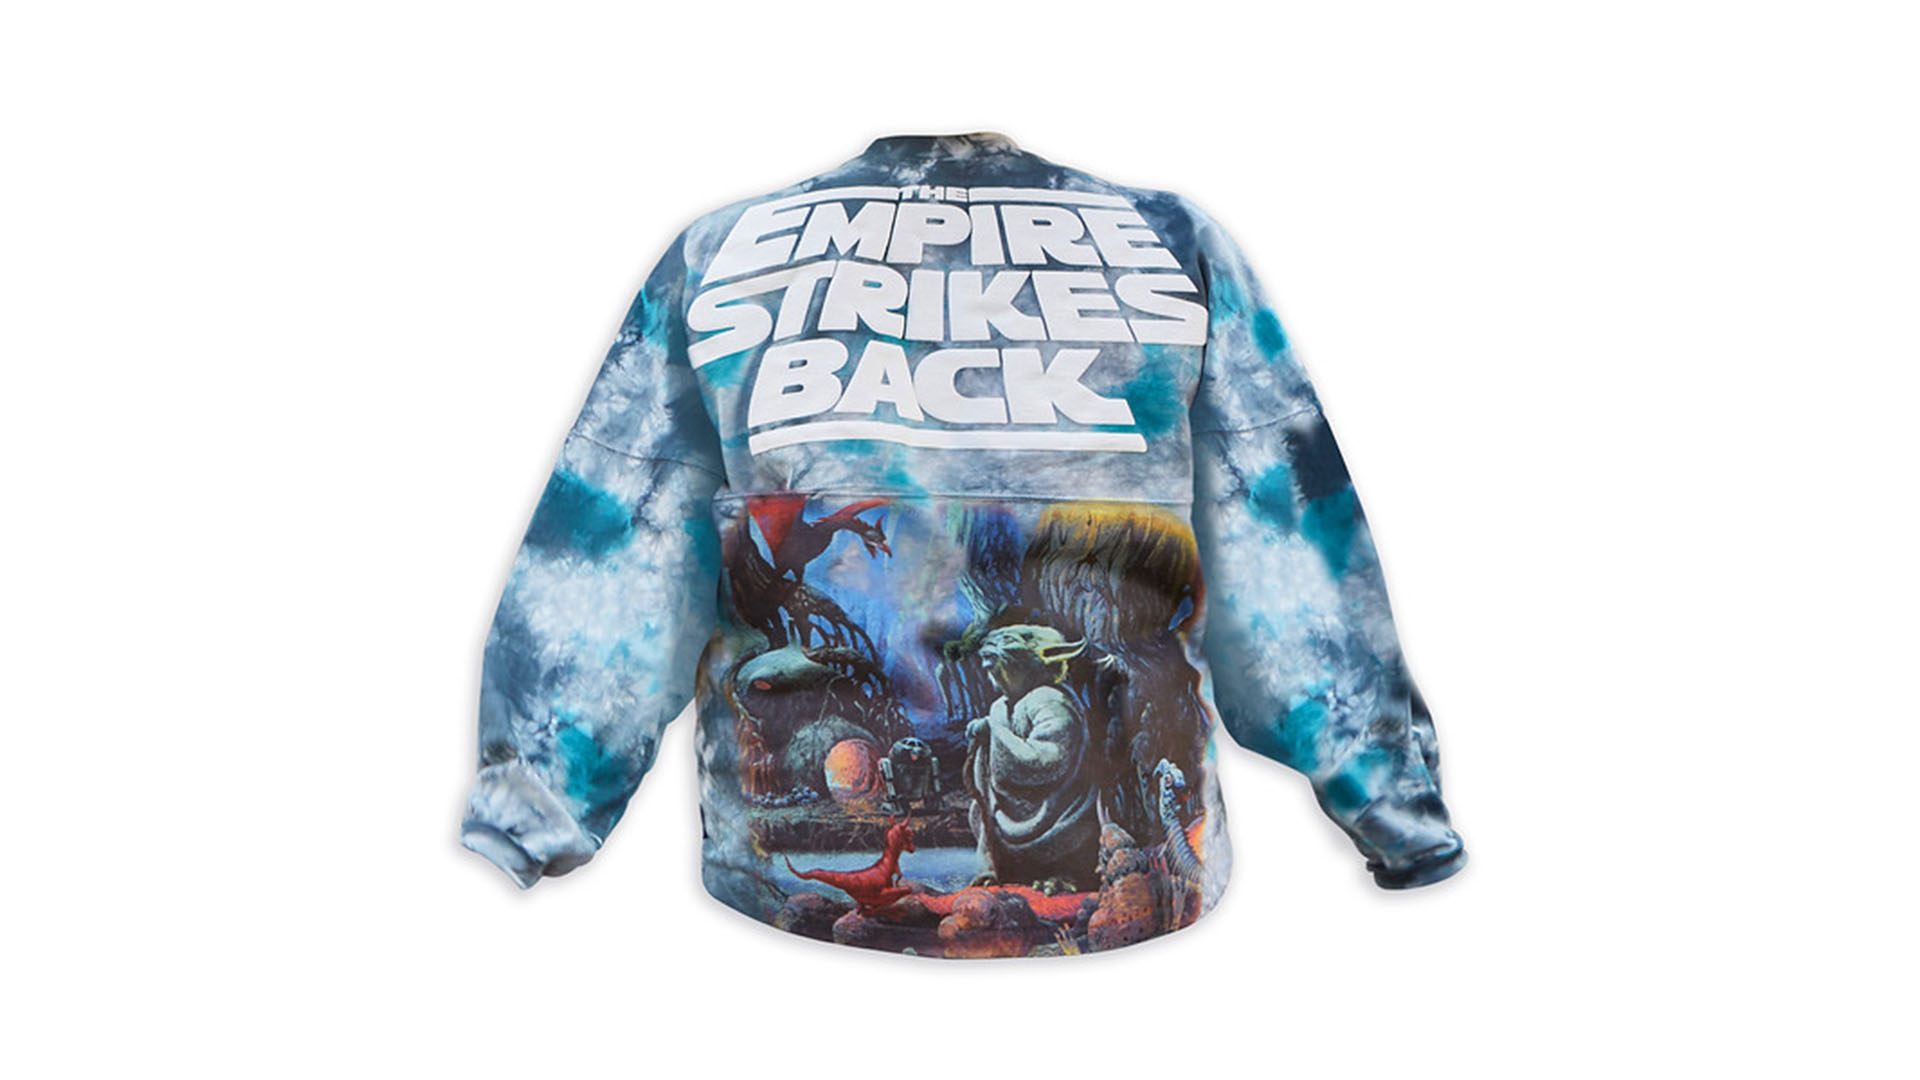 A long-sleeved tie-dye shirt inspired by Star Wars: The Empire Strikes Back